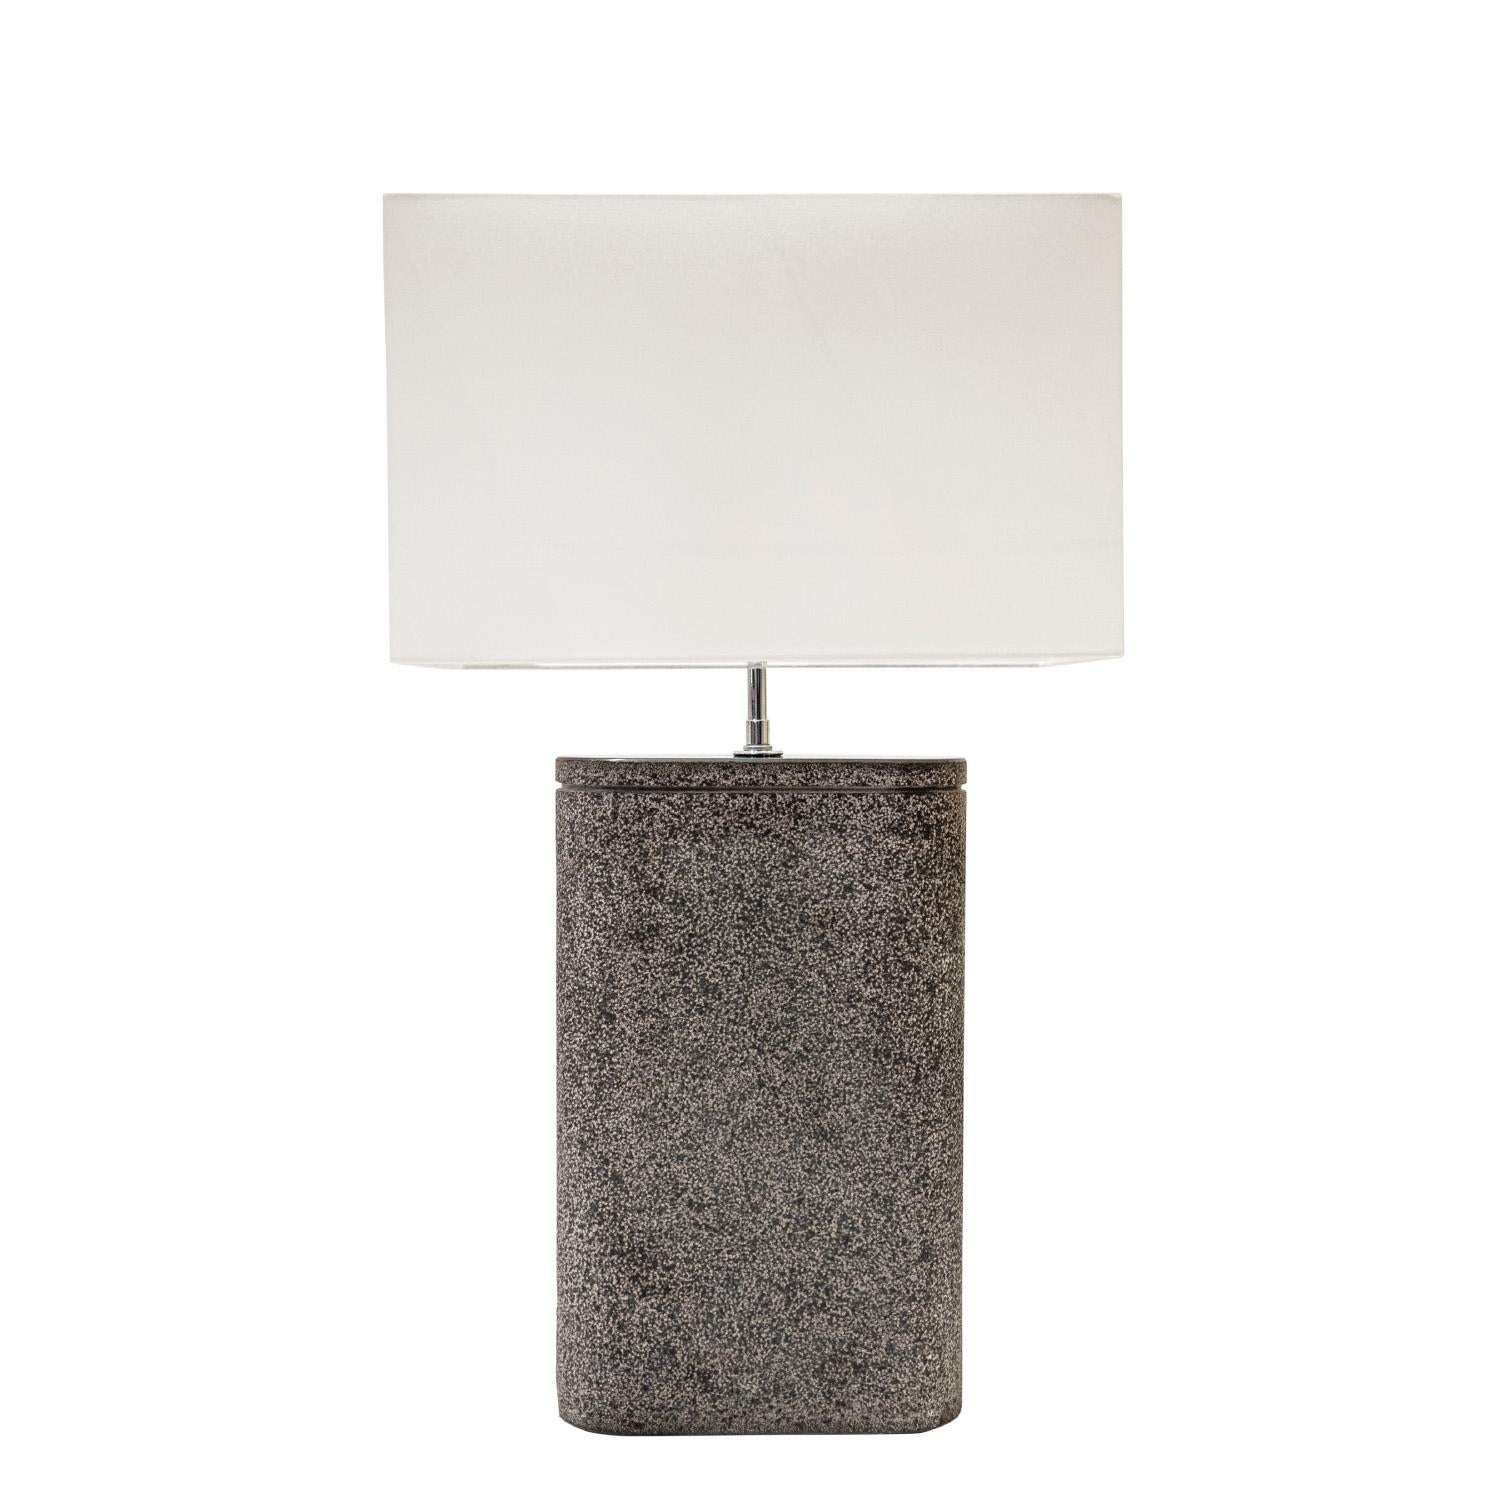 “Oval Table Lamp” in solid black granite with lavastone finish and chrome hardware by Karl Springer, American 1980's. This is a solid block of granite and it has been impeccably finished.  Chrome cleaned and polished.  Newly rewired with new sockets